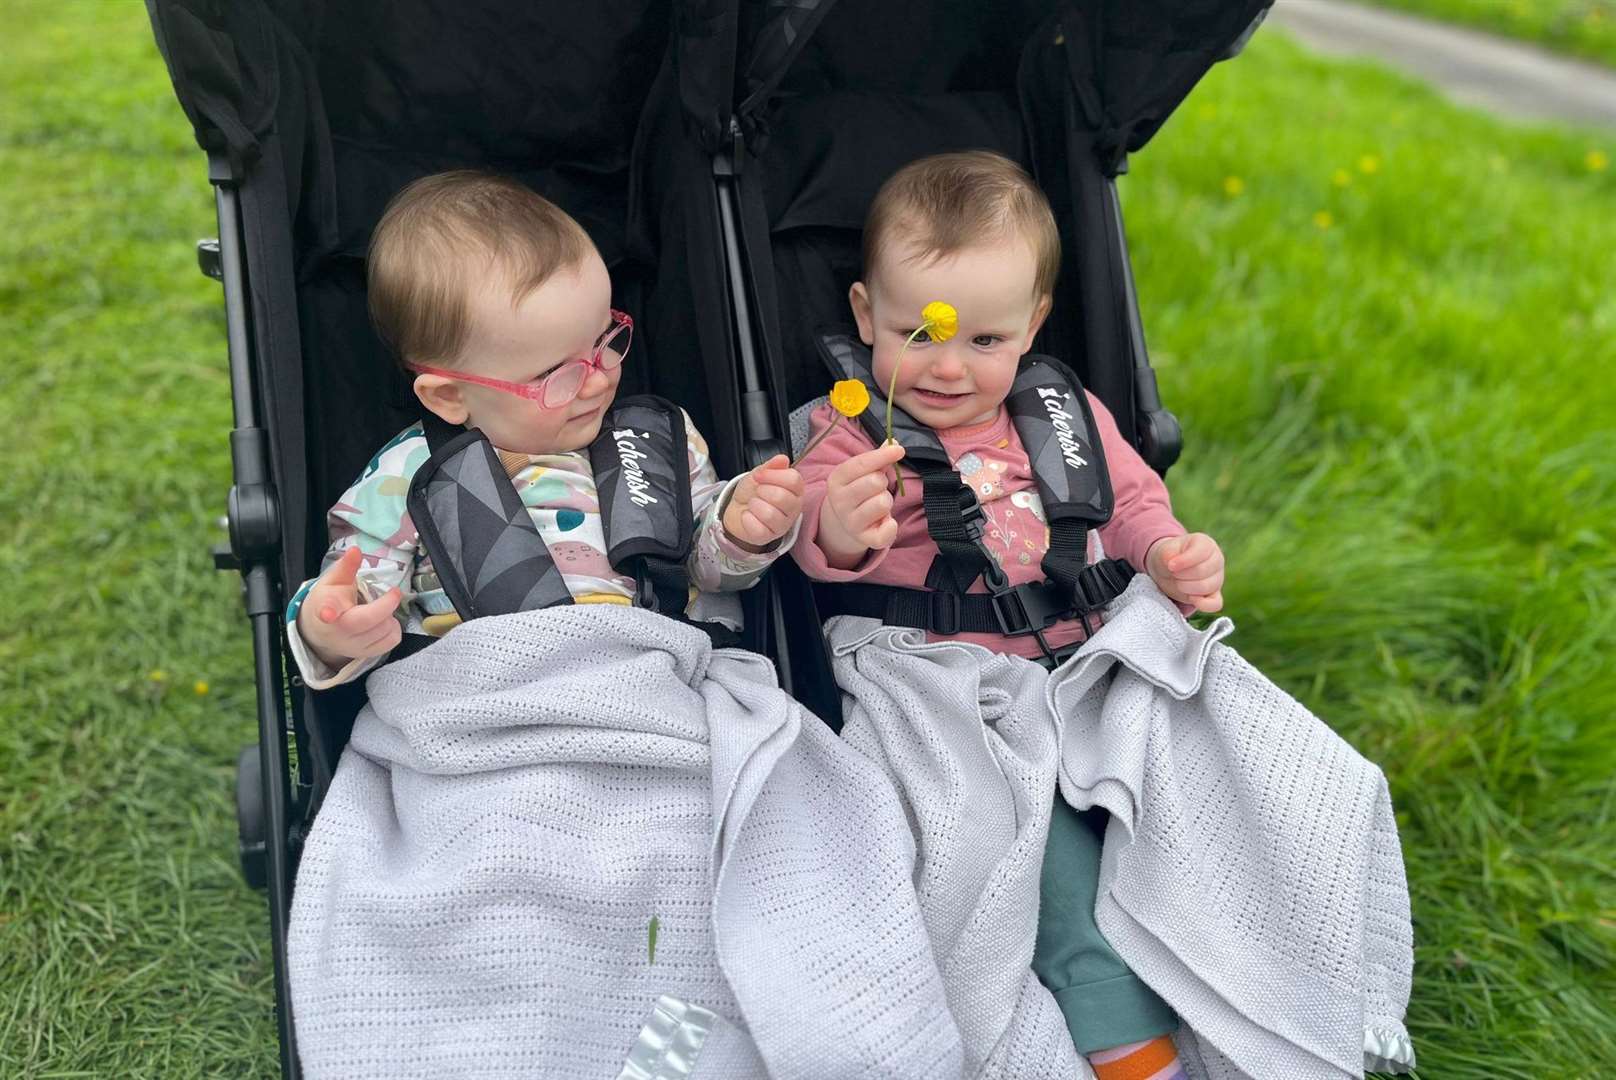 Identical twins Astrid and Iris both have difficulty walking. Picture: Sarah Johnson